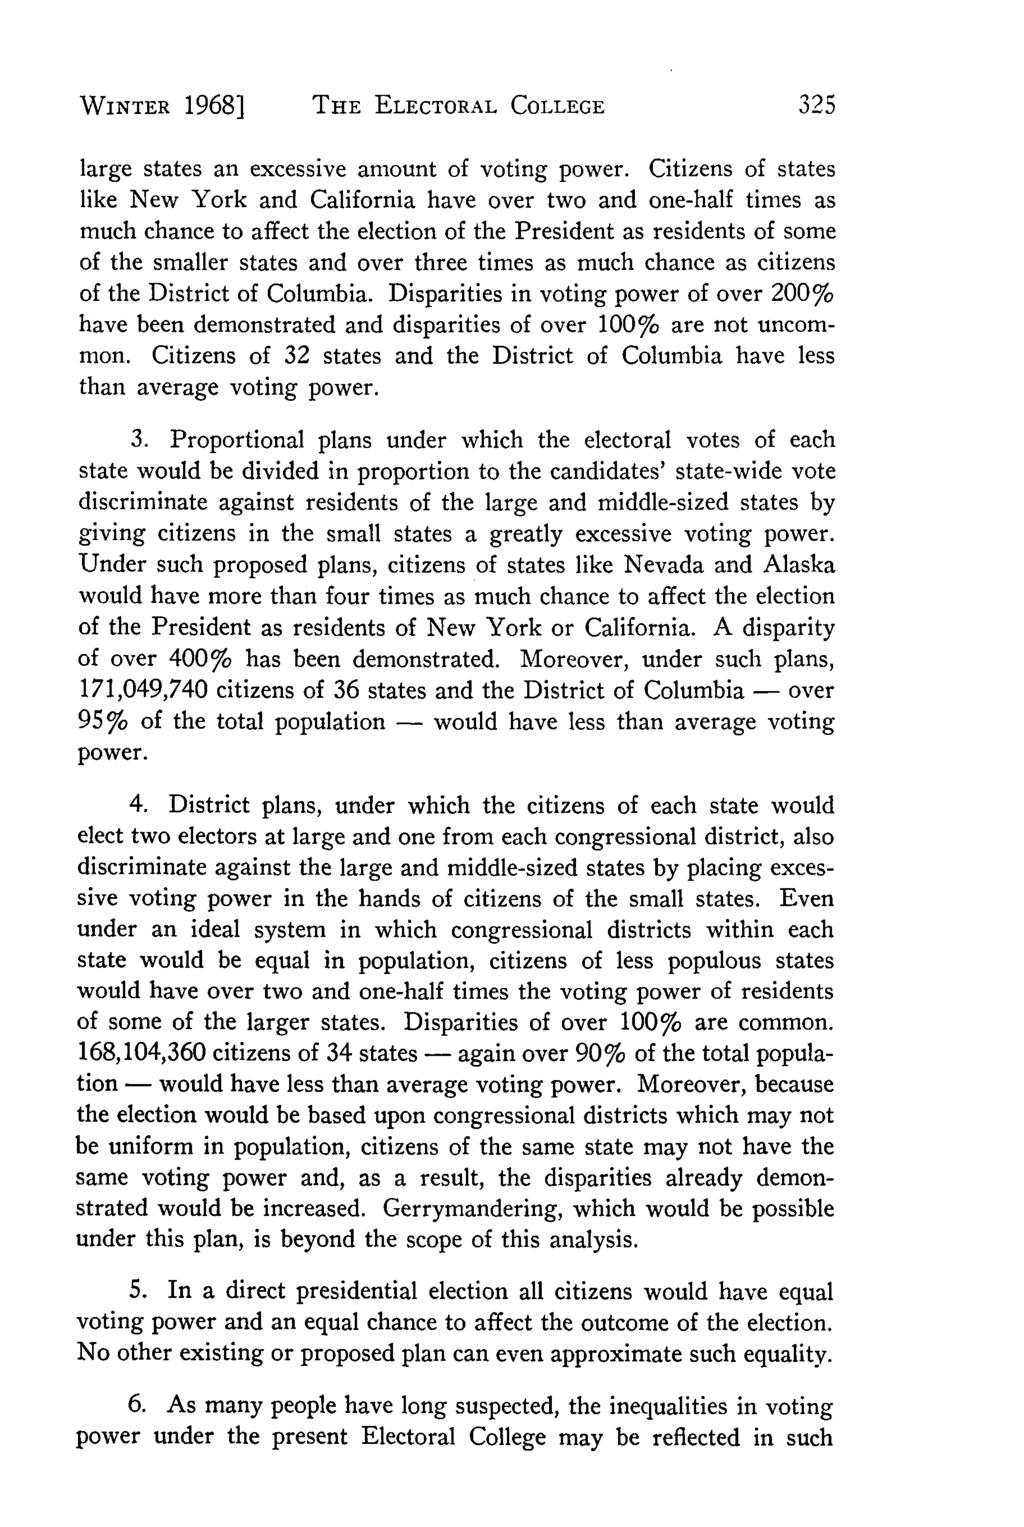 Villanova Law Review, Vol. 13, Iss. 2 [1968], Art. 3 WINTER 1968] THE ELECTORAL COLLEGE large states an excessive amount of voting power.